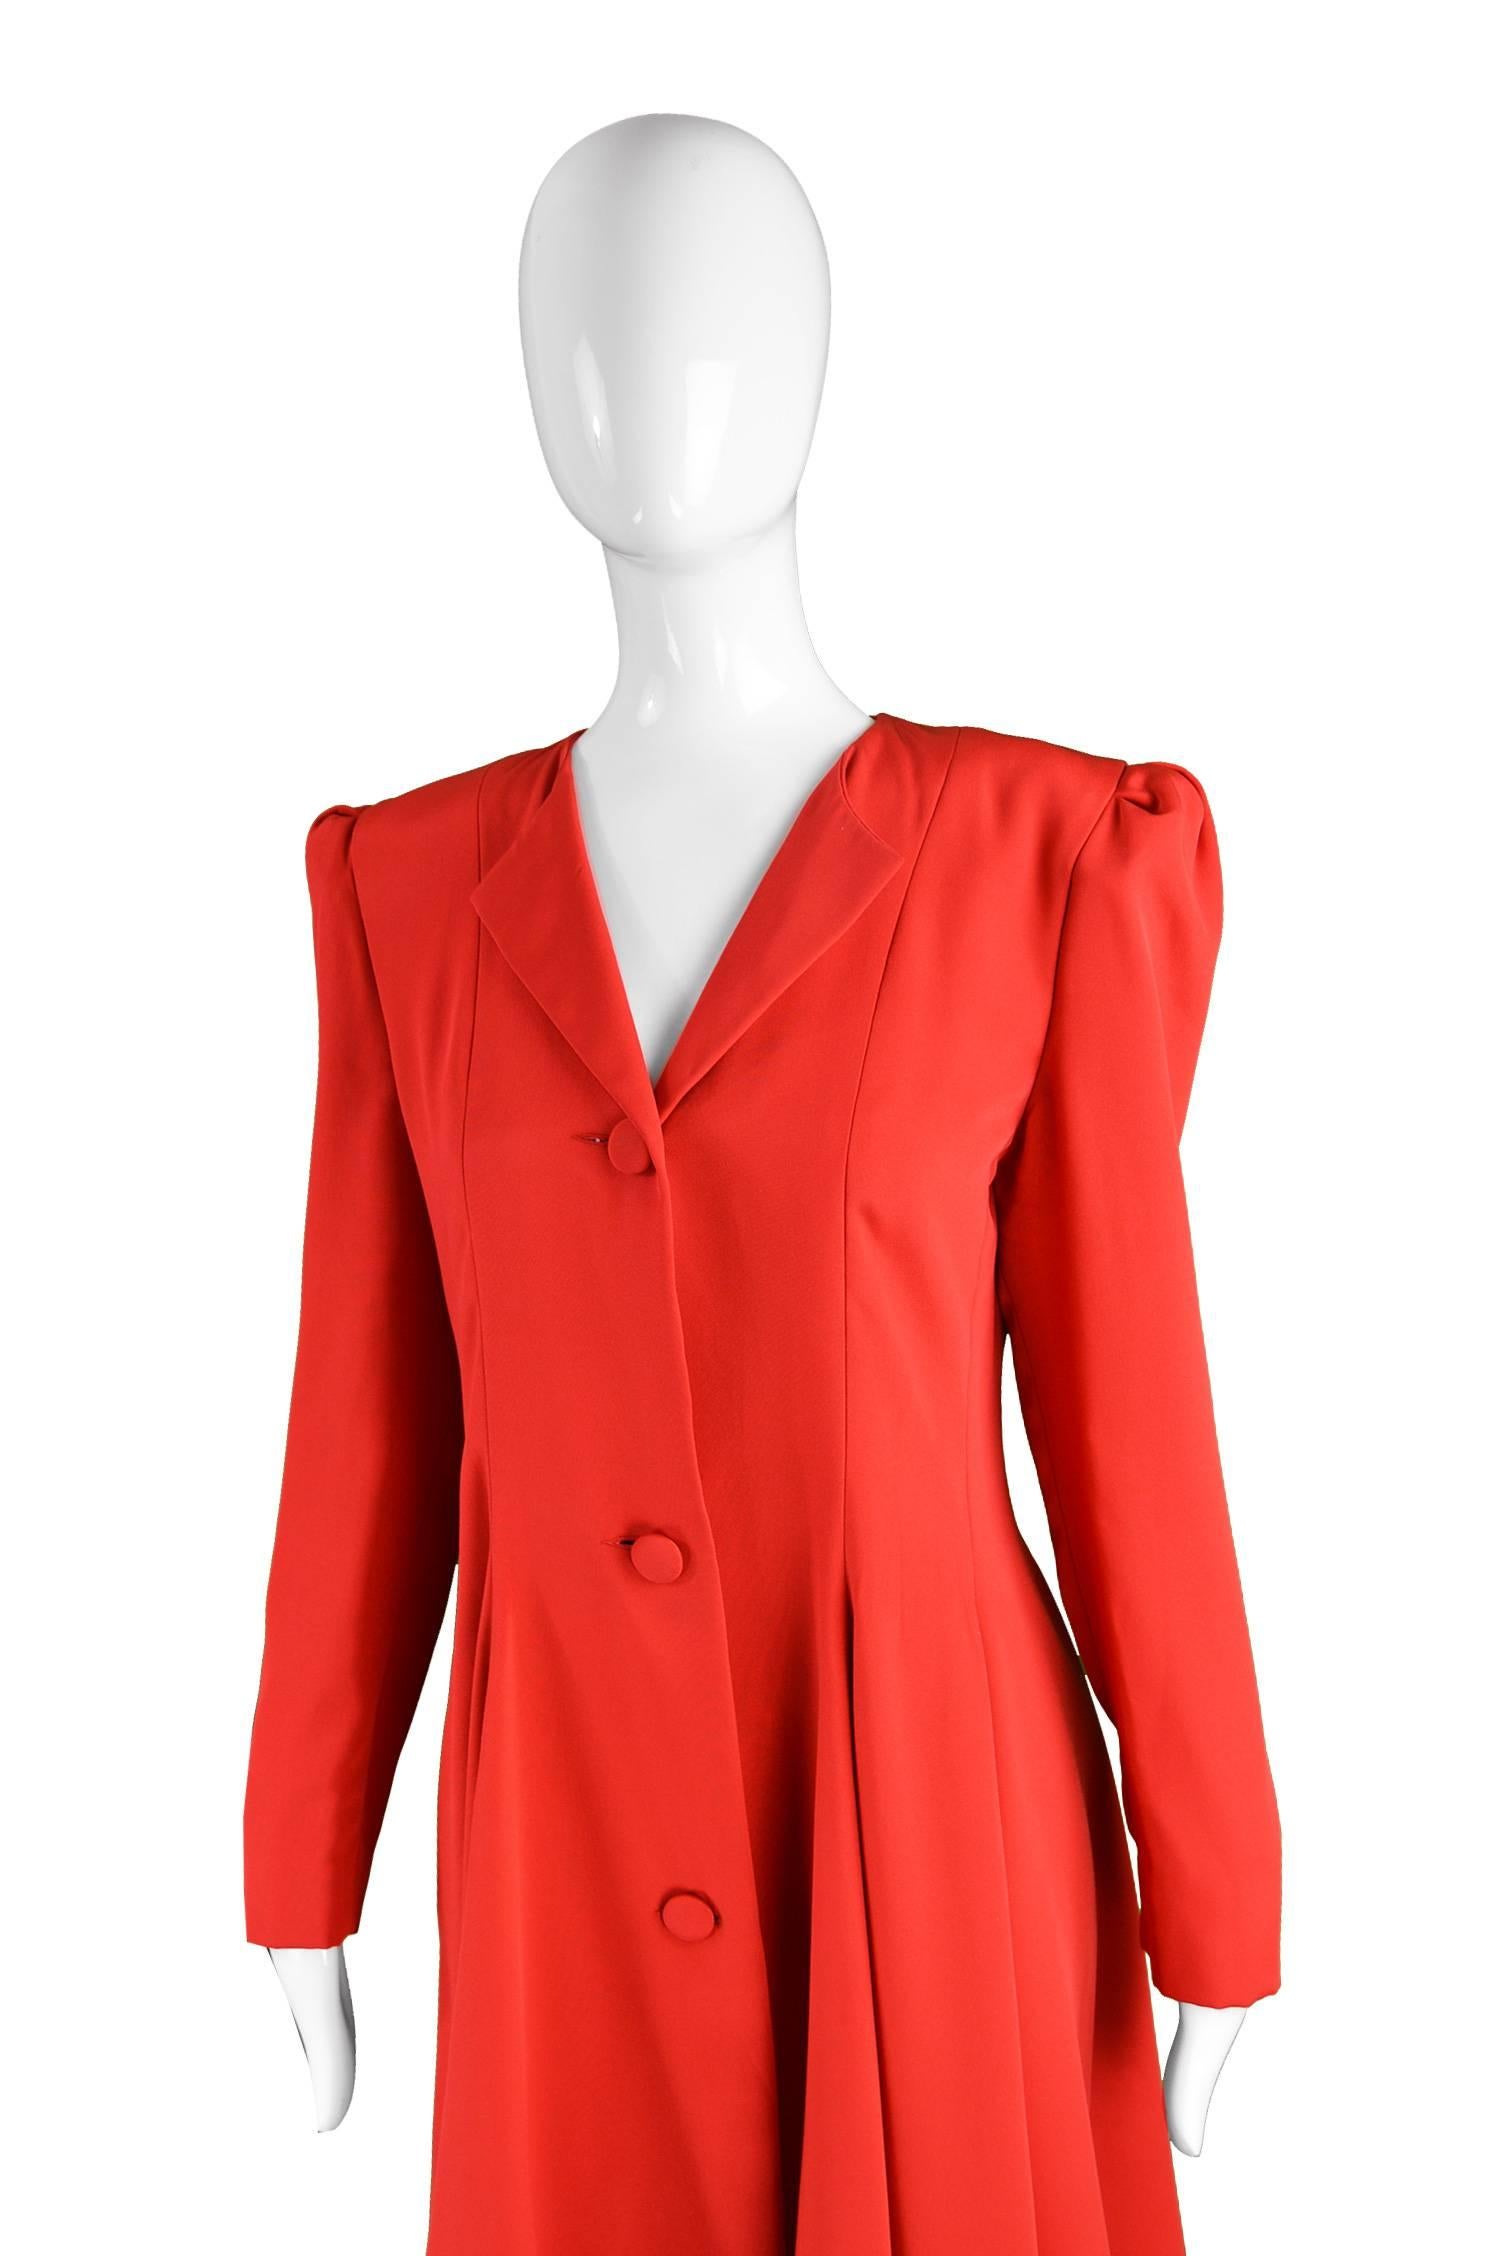 Carolina Herrera For Neiman Marcus Red Silk Full Skirt Evening Coat, 1980s In Excellent Condition In Doncaster, South Yorkshire